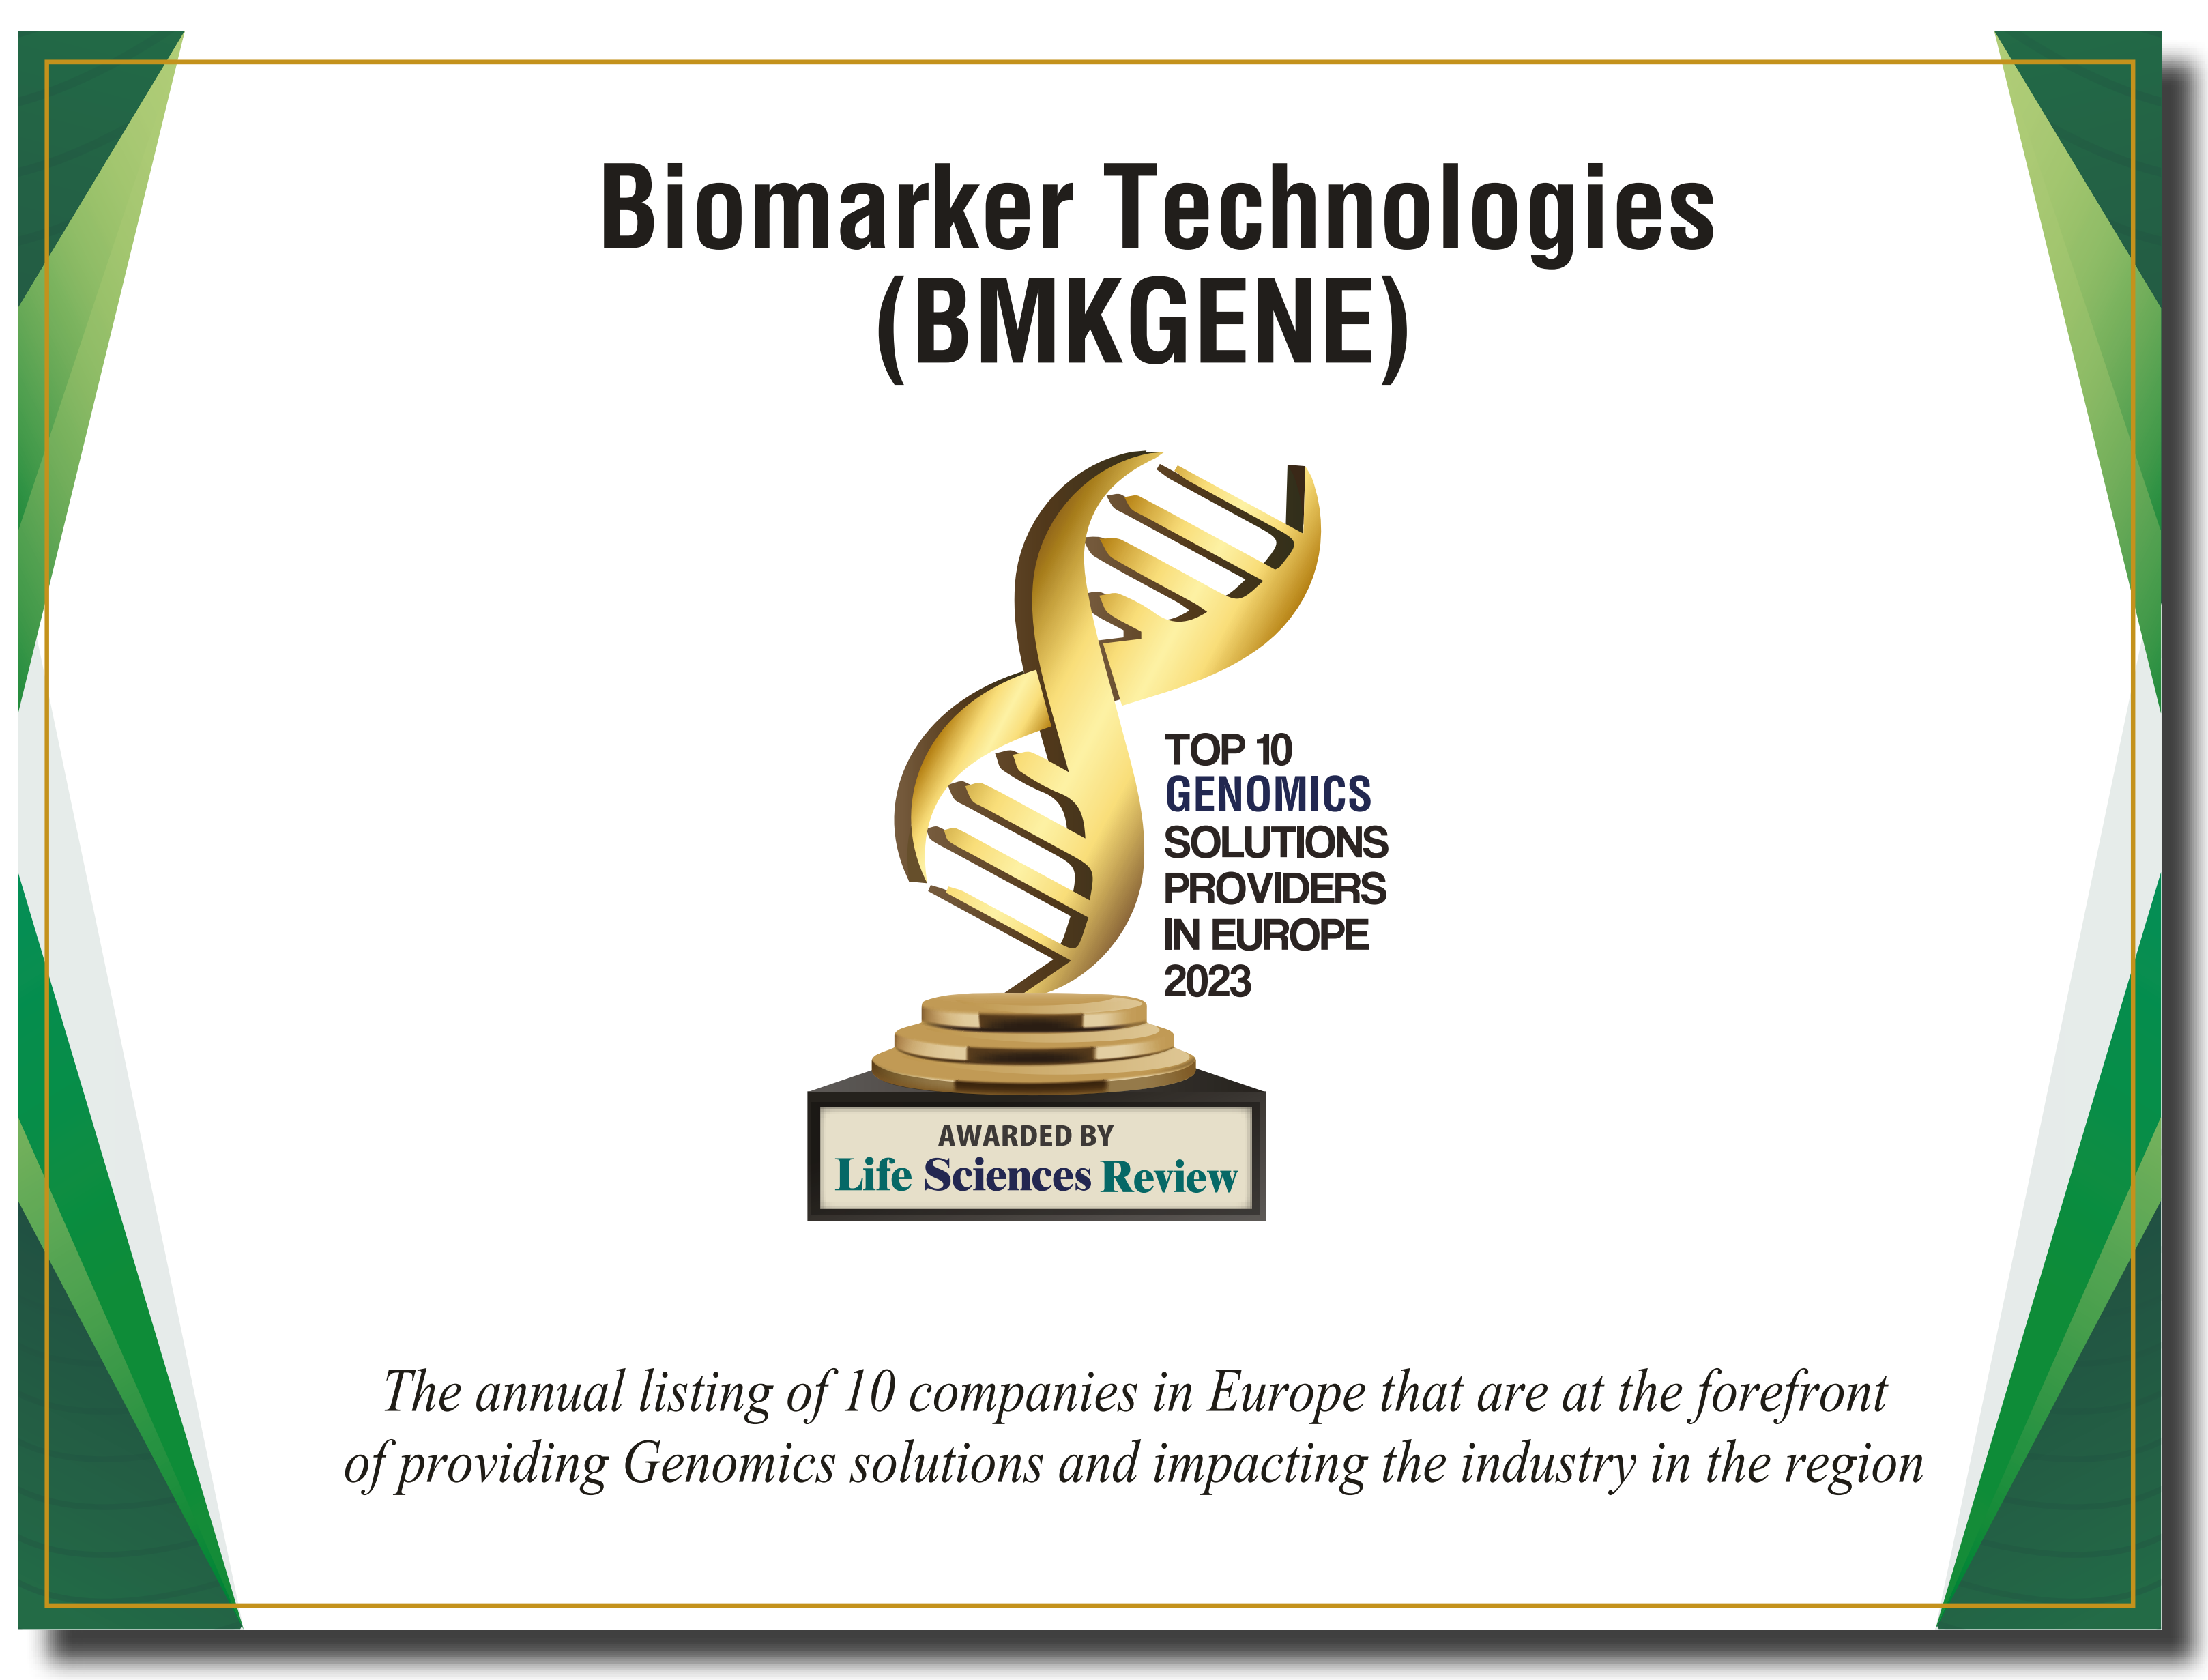 Proud to be selected as one of the Top 10 Genomic Solutions Companies in Europe for 2023!